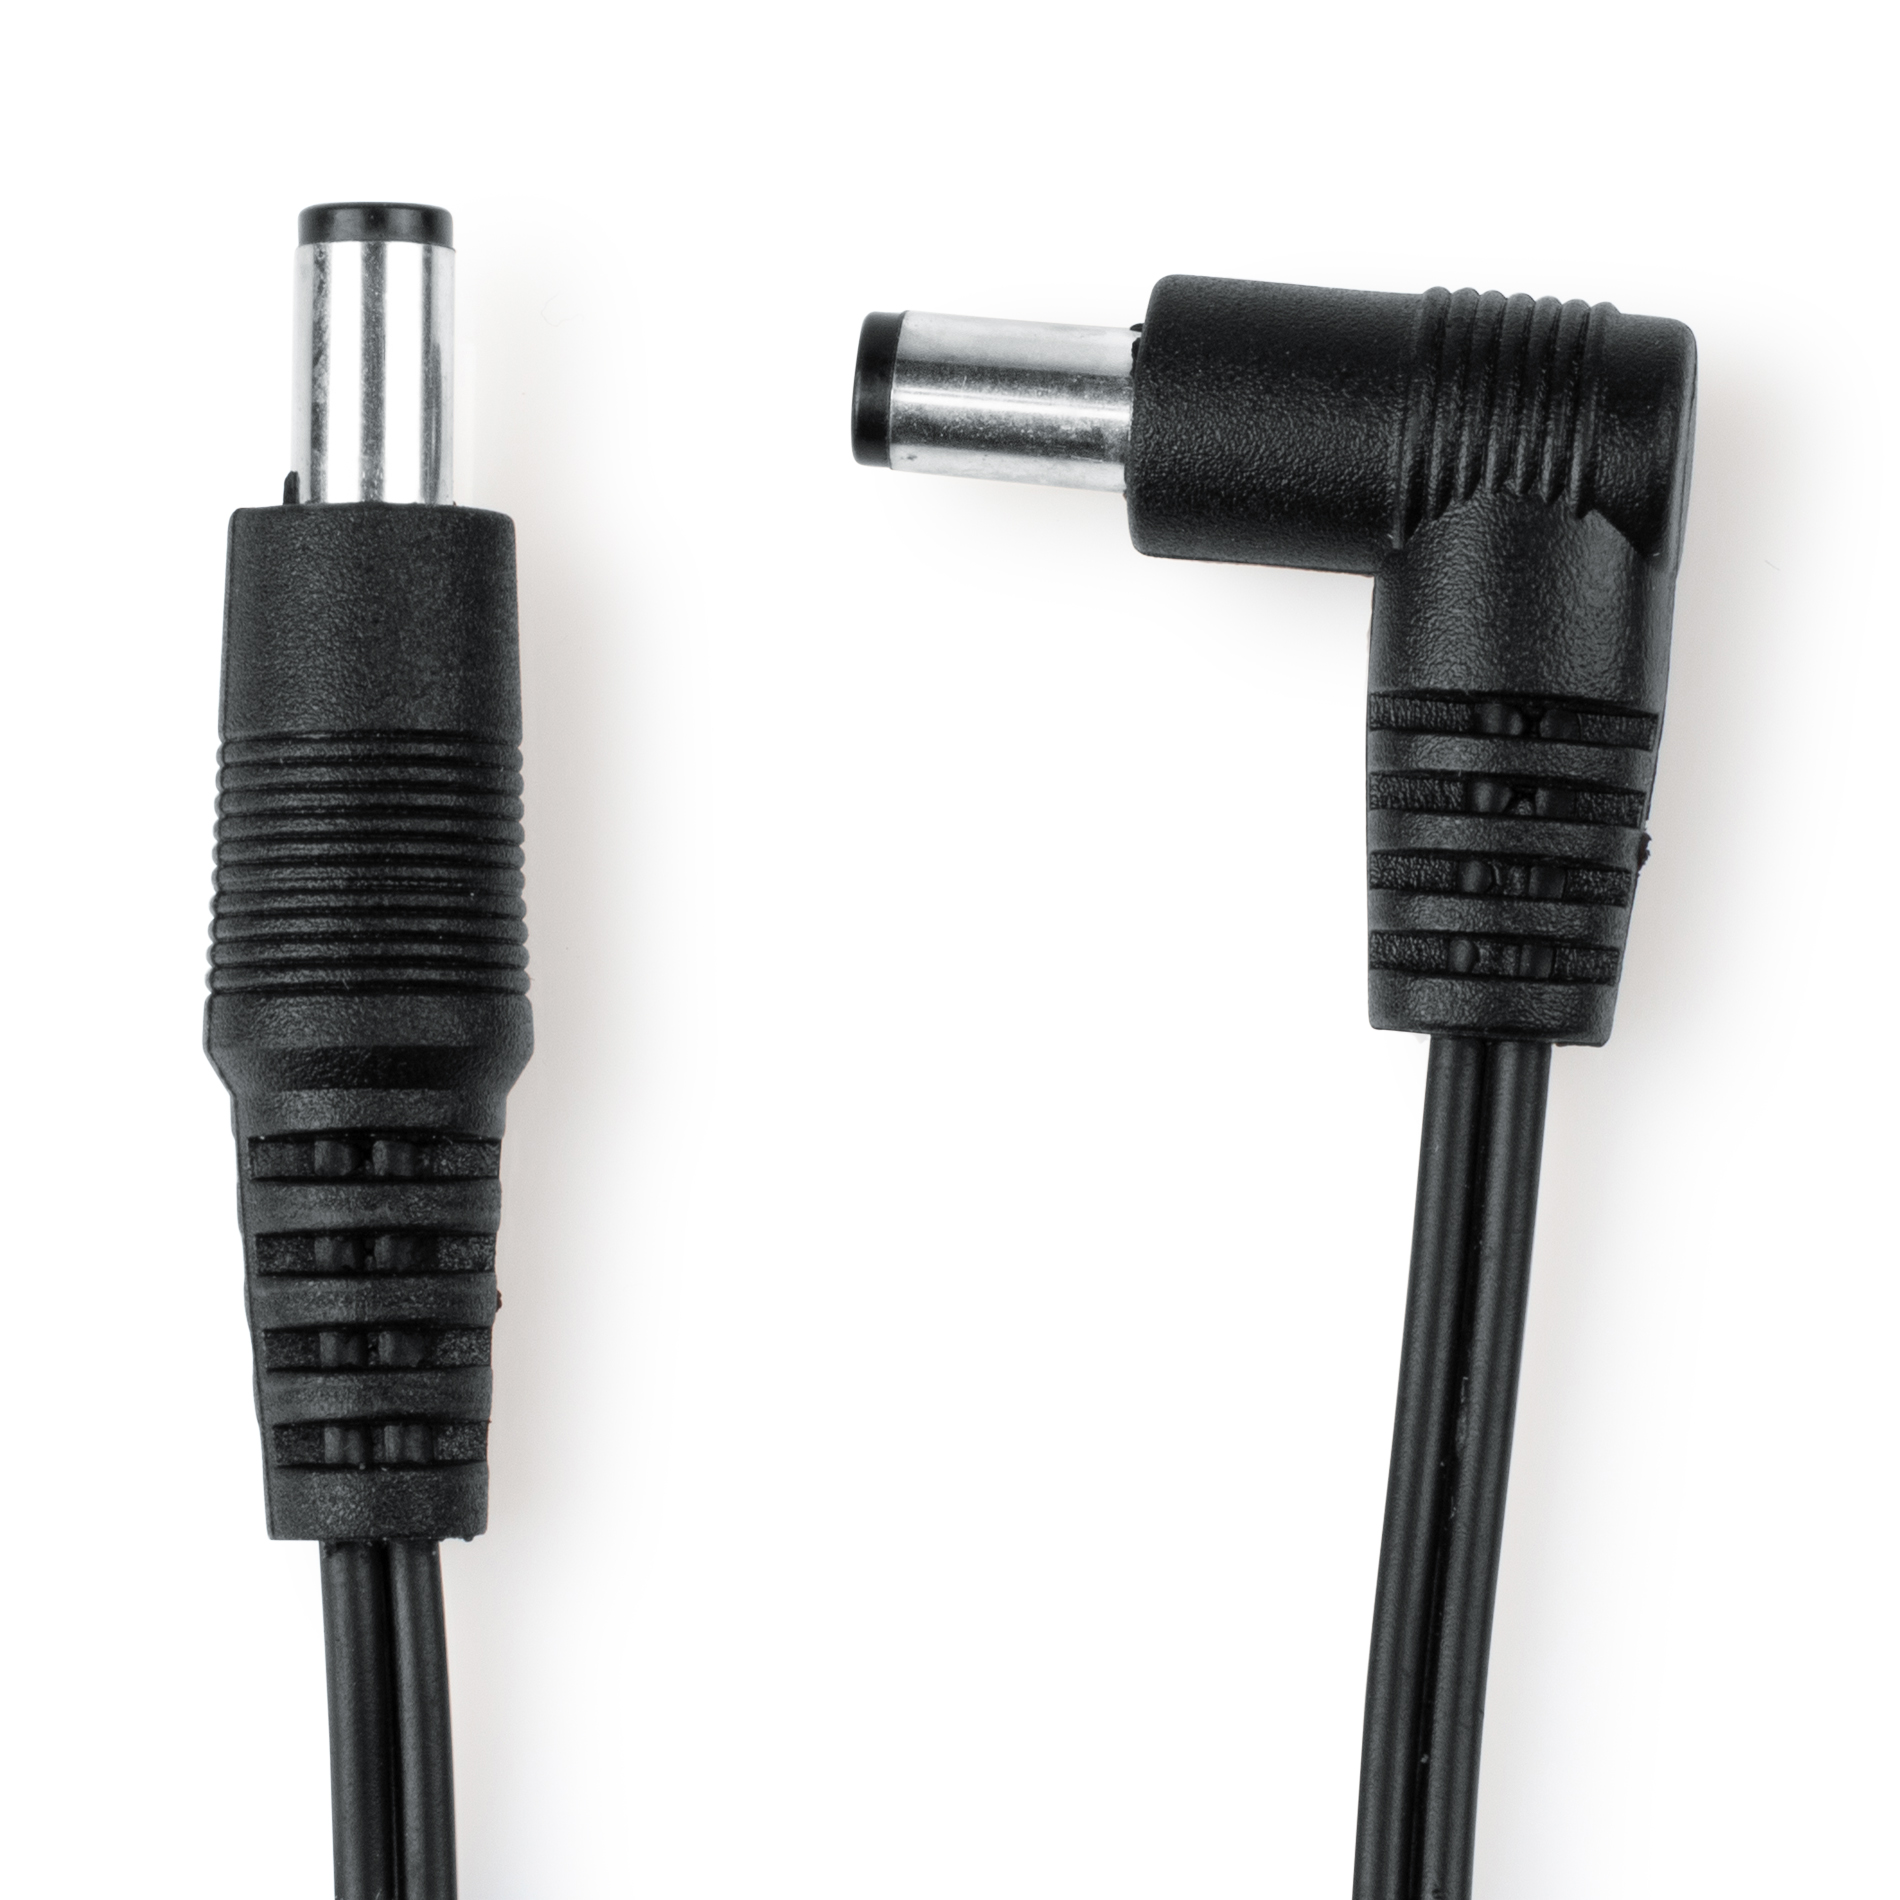 Single DC Power Cable for Pedals – 8″ Long-GTR-PWR-DCP8